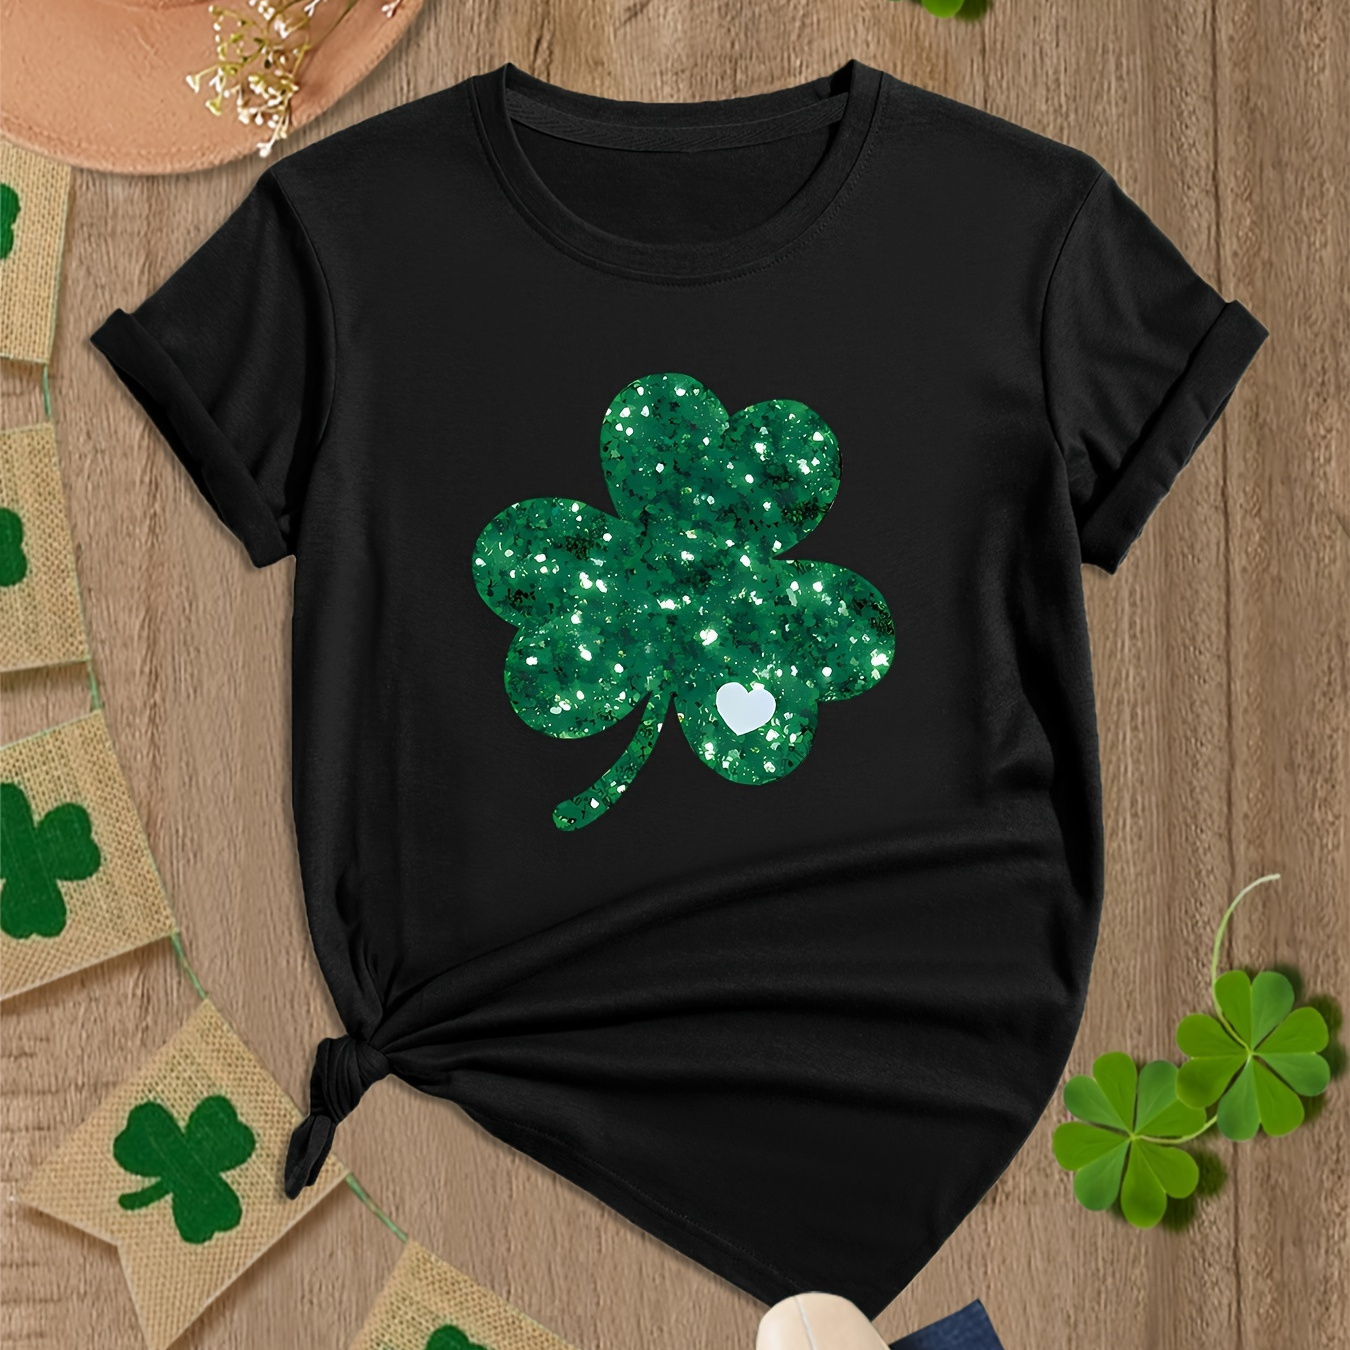 

St. Patrick's Day Clover Graphic Round Neck Sports Tee, Fashion Casual Stretch Short Sleeve Sport T-shirt, Women's Clothing Graphic(printed Without Diamonds)